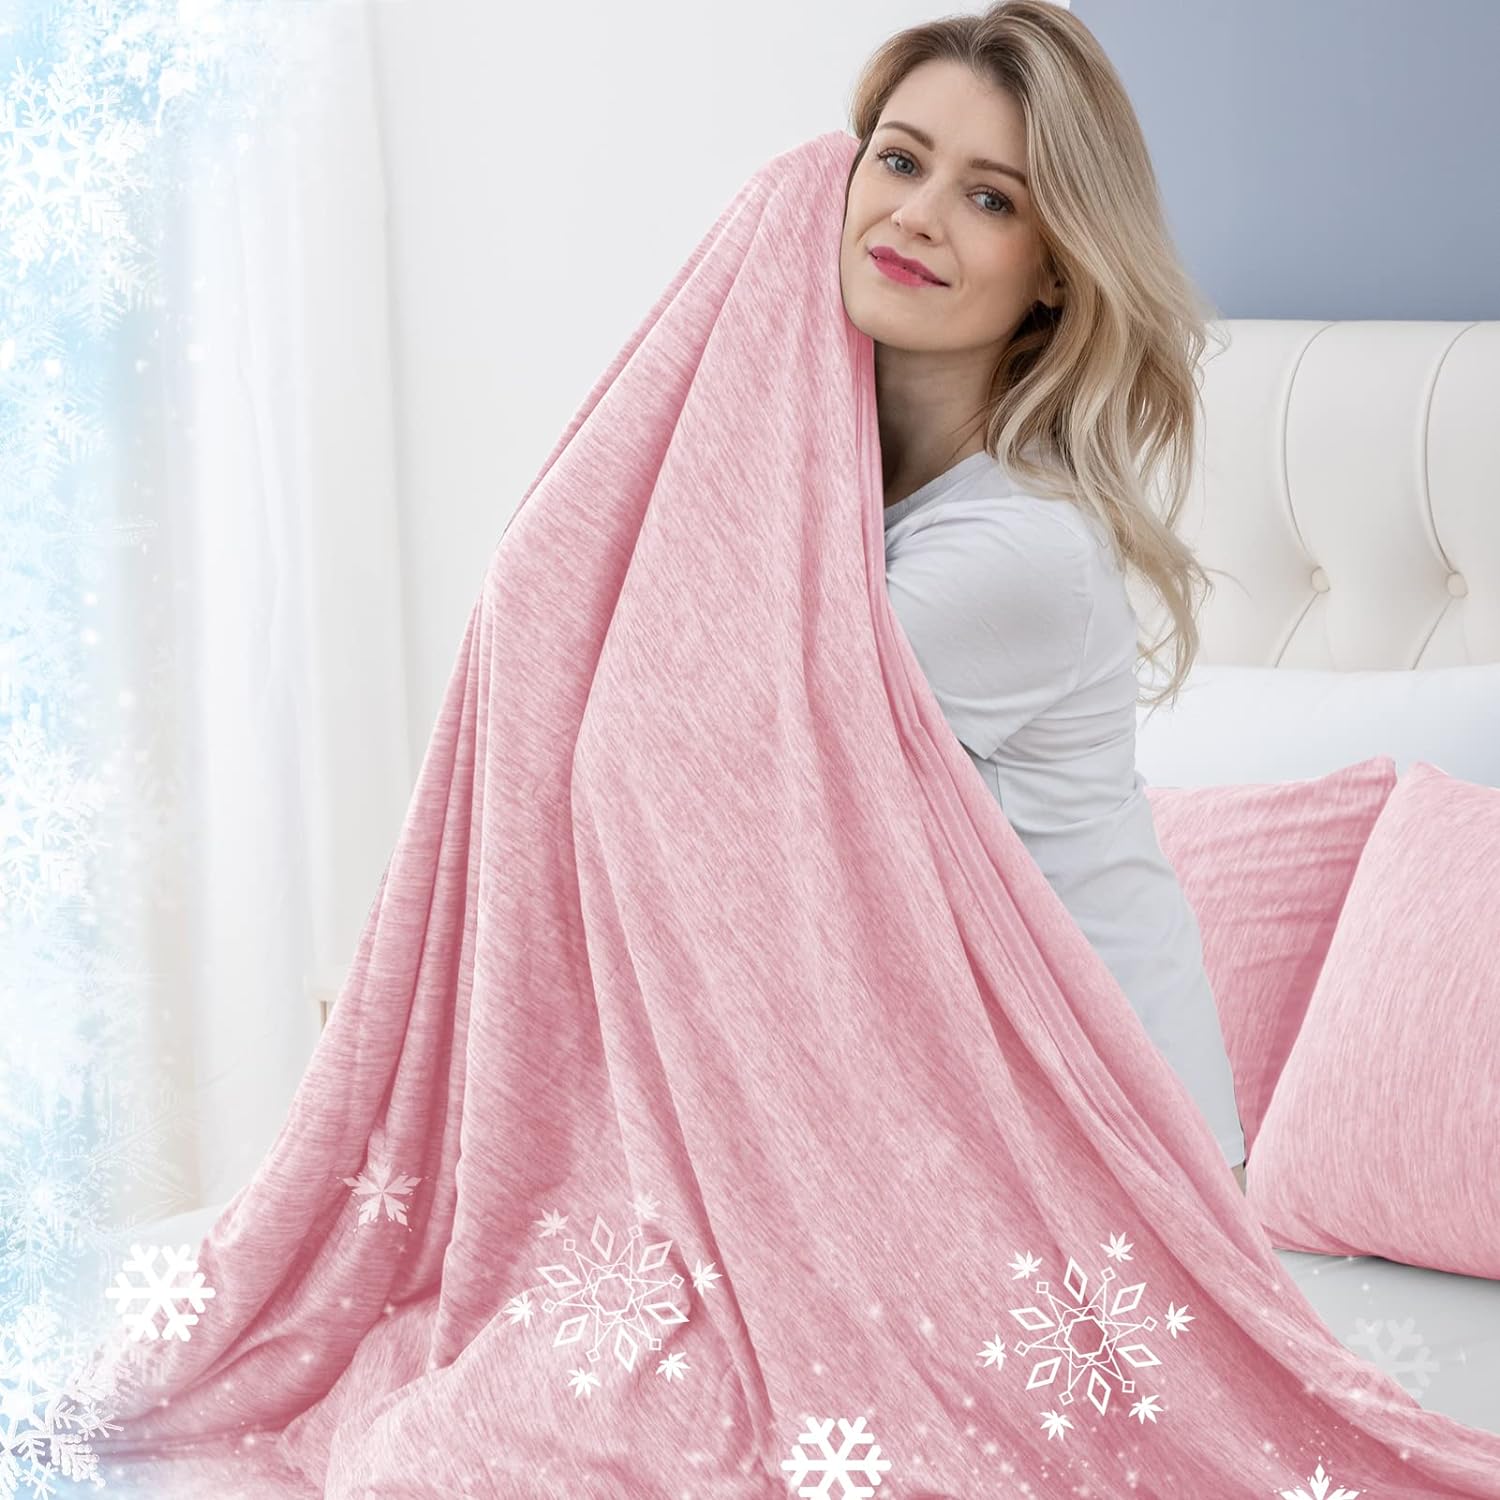 CHOSHOME Cooling Blanket for Hot Sleepers Lightweight Summer Cold Thin Blankets for Sleeping, Hot Flashes Night Sweats, Soft Blanket for Bed, Throw Size, Pink